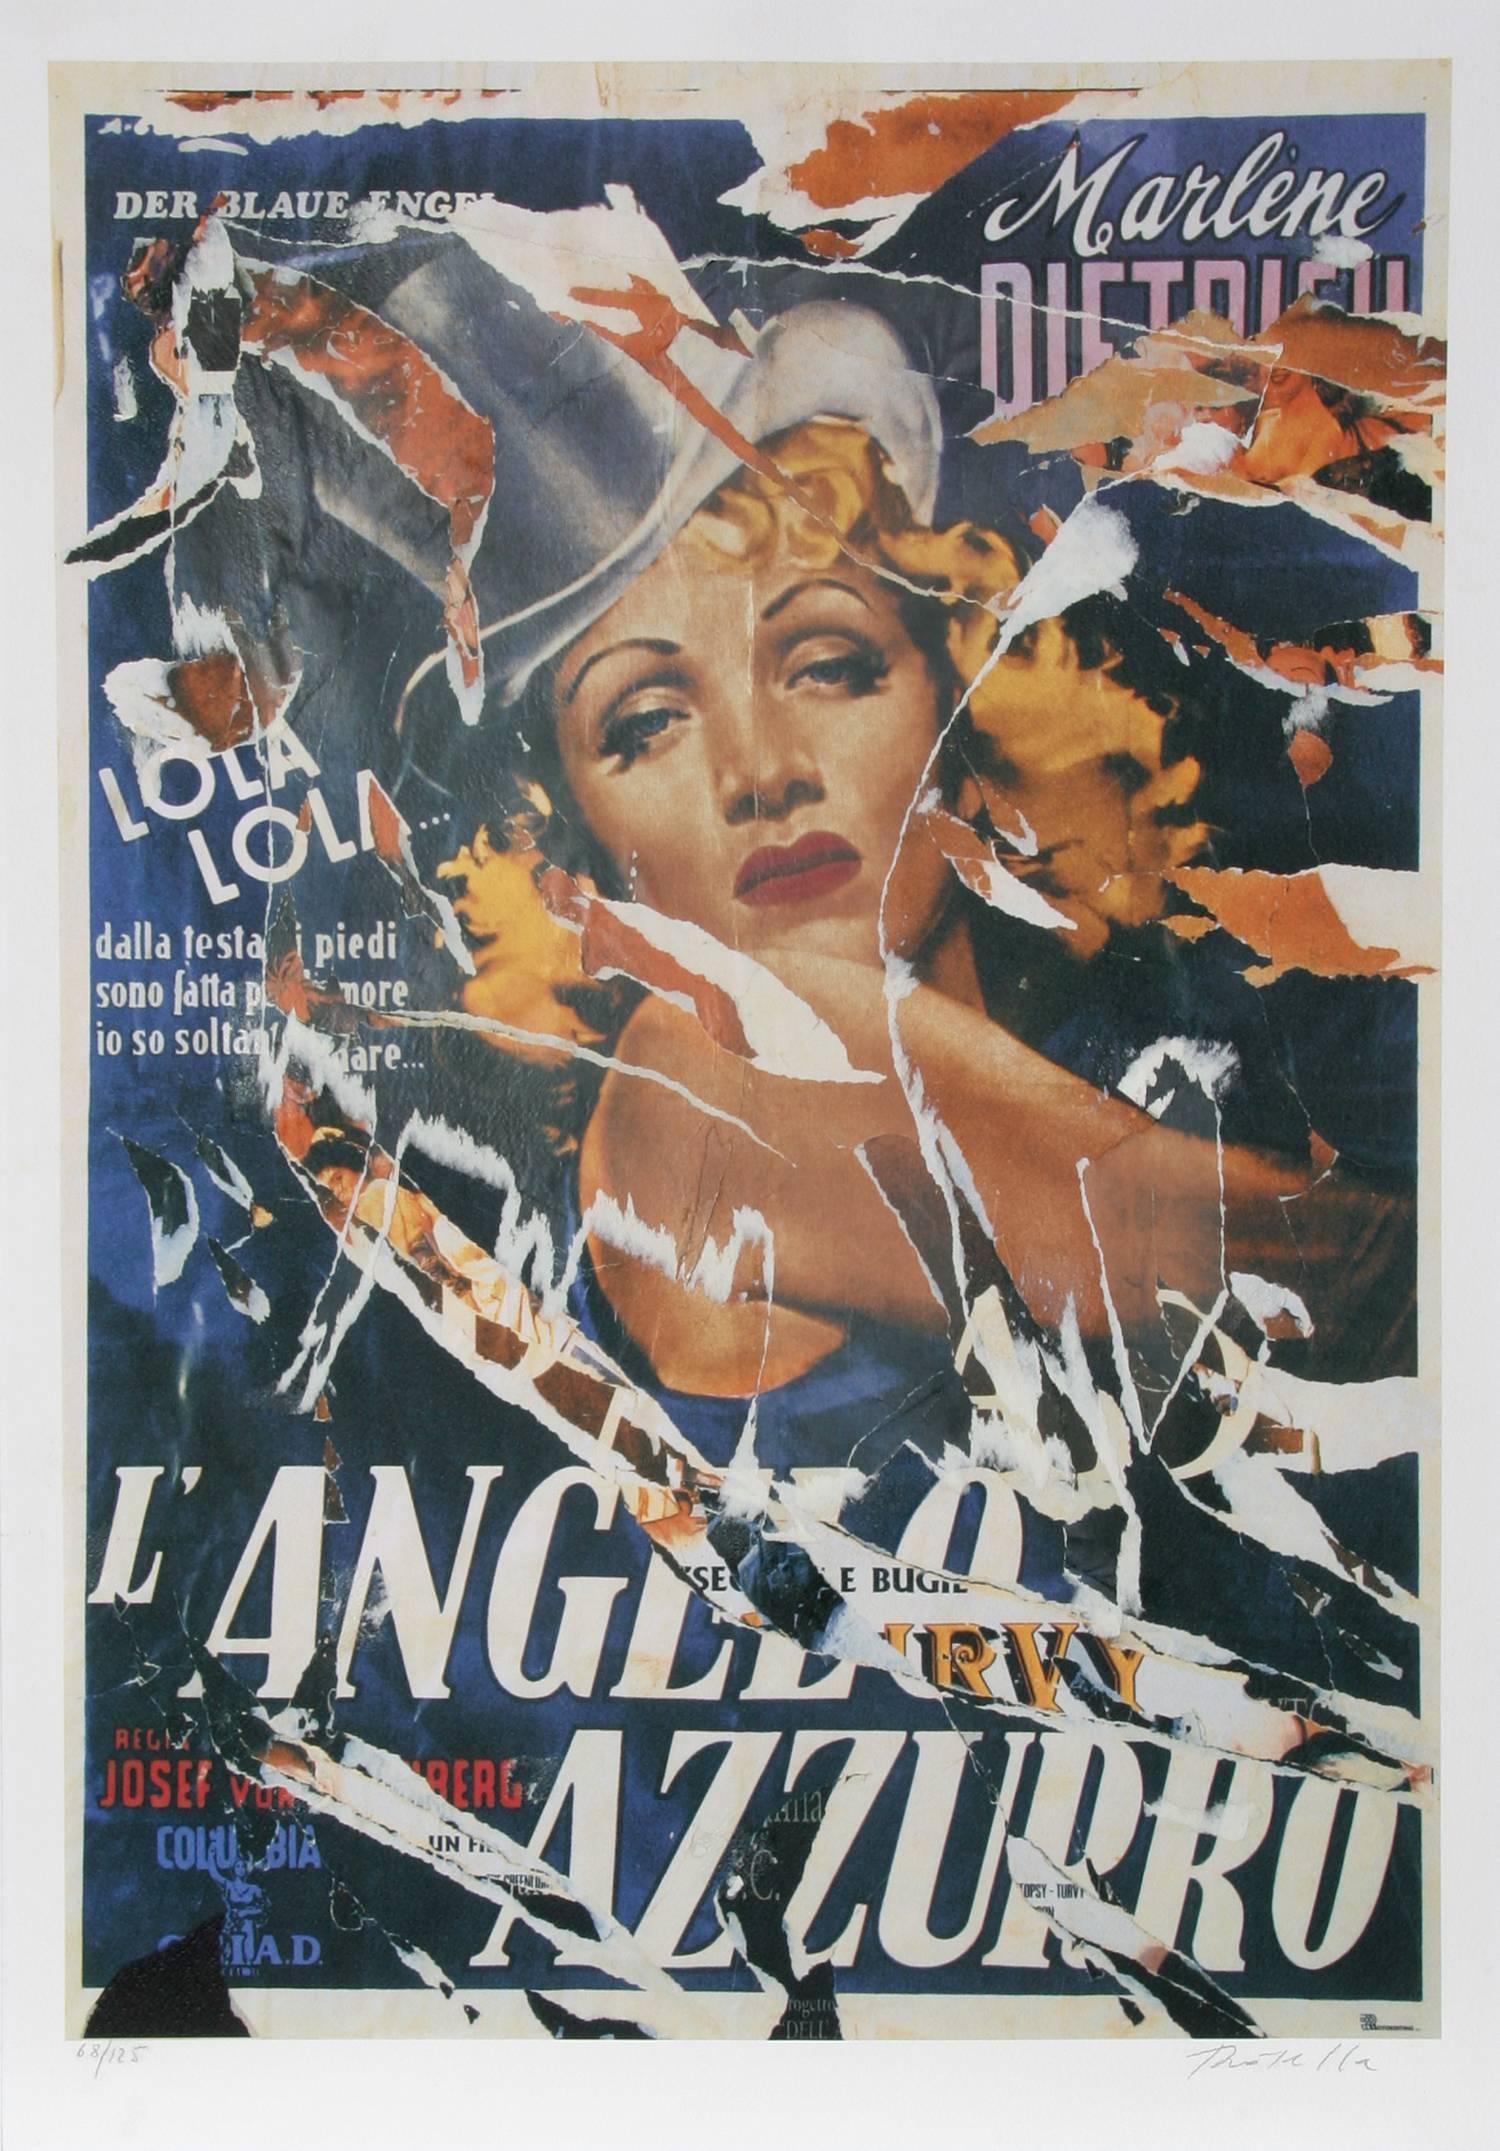 Made to Order Love (Marlene Dietrich) - The Blue Angel, Screenprint by Rotella